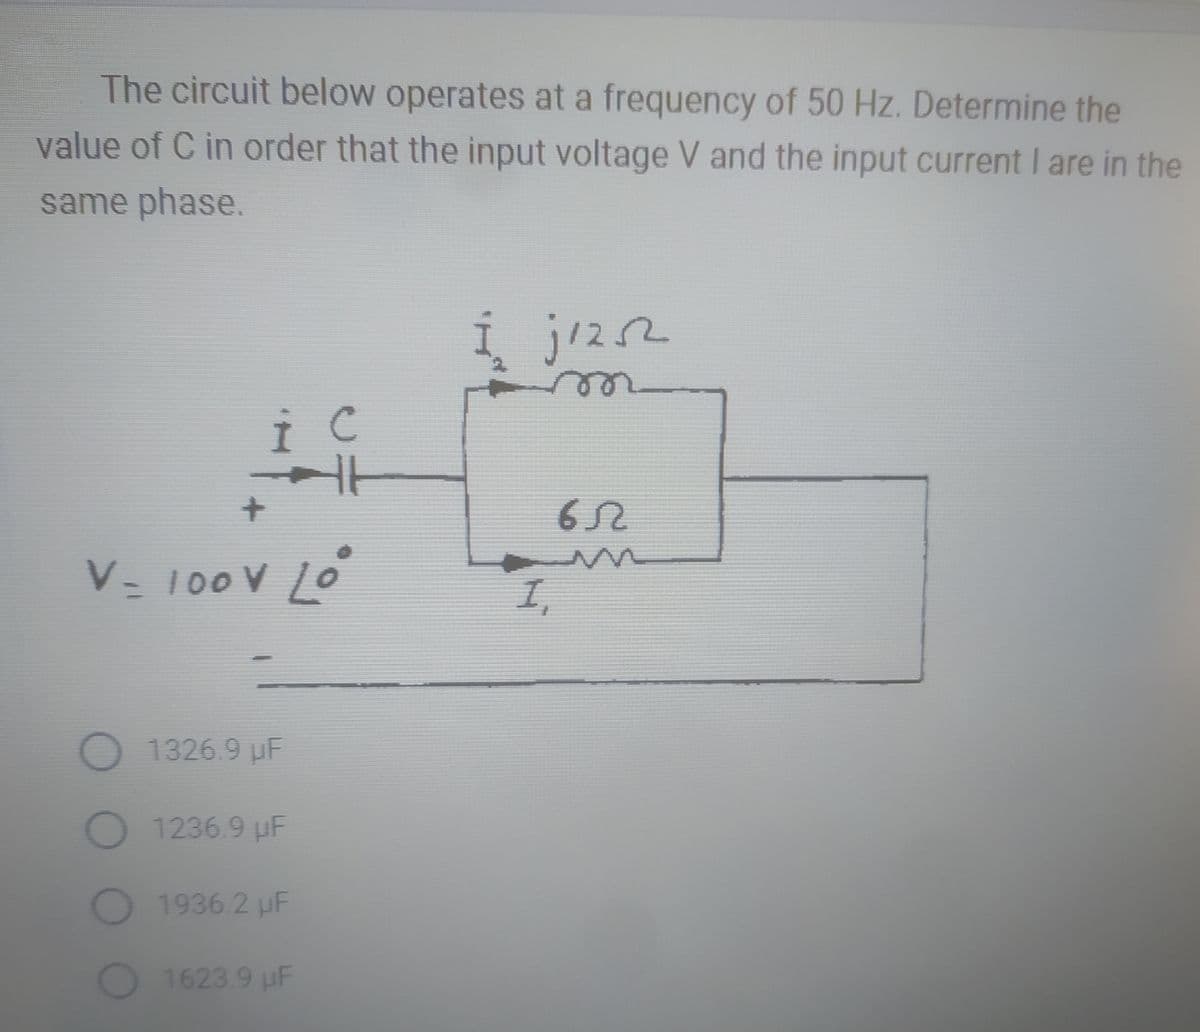 The circuit below operates at a frequency of 50 Hz. Determine the
value of C in order that the input voltage V and the input current I are in the
same phase.
i c
V- 100V Loº
O 1326.9 μF
1236.9 µF
1936.2 µF
1623.9 µF
Í j1252
1
65